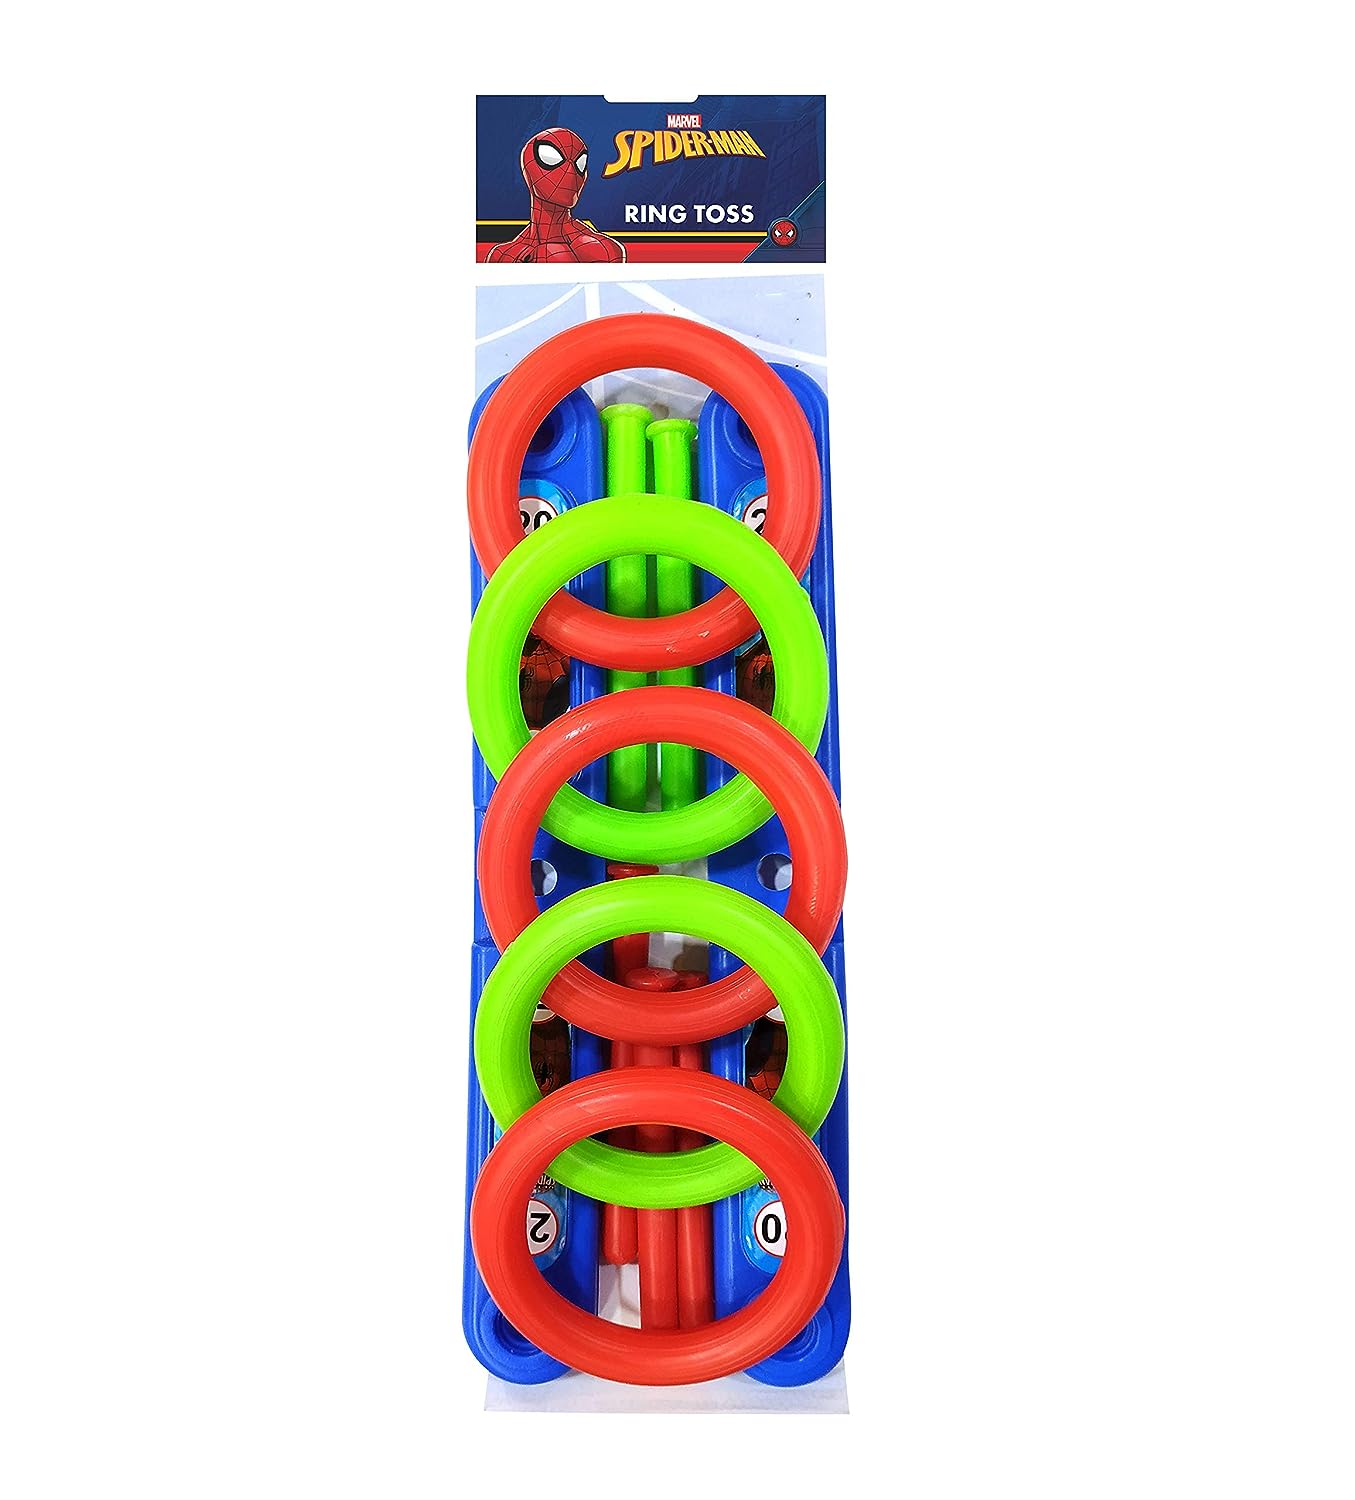 IToys -Disney Spiderman Plastic Ringtoss Set, Indoor/Outdoor Sports Game for Kids Ages 3-8 - Multicolor